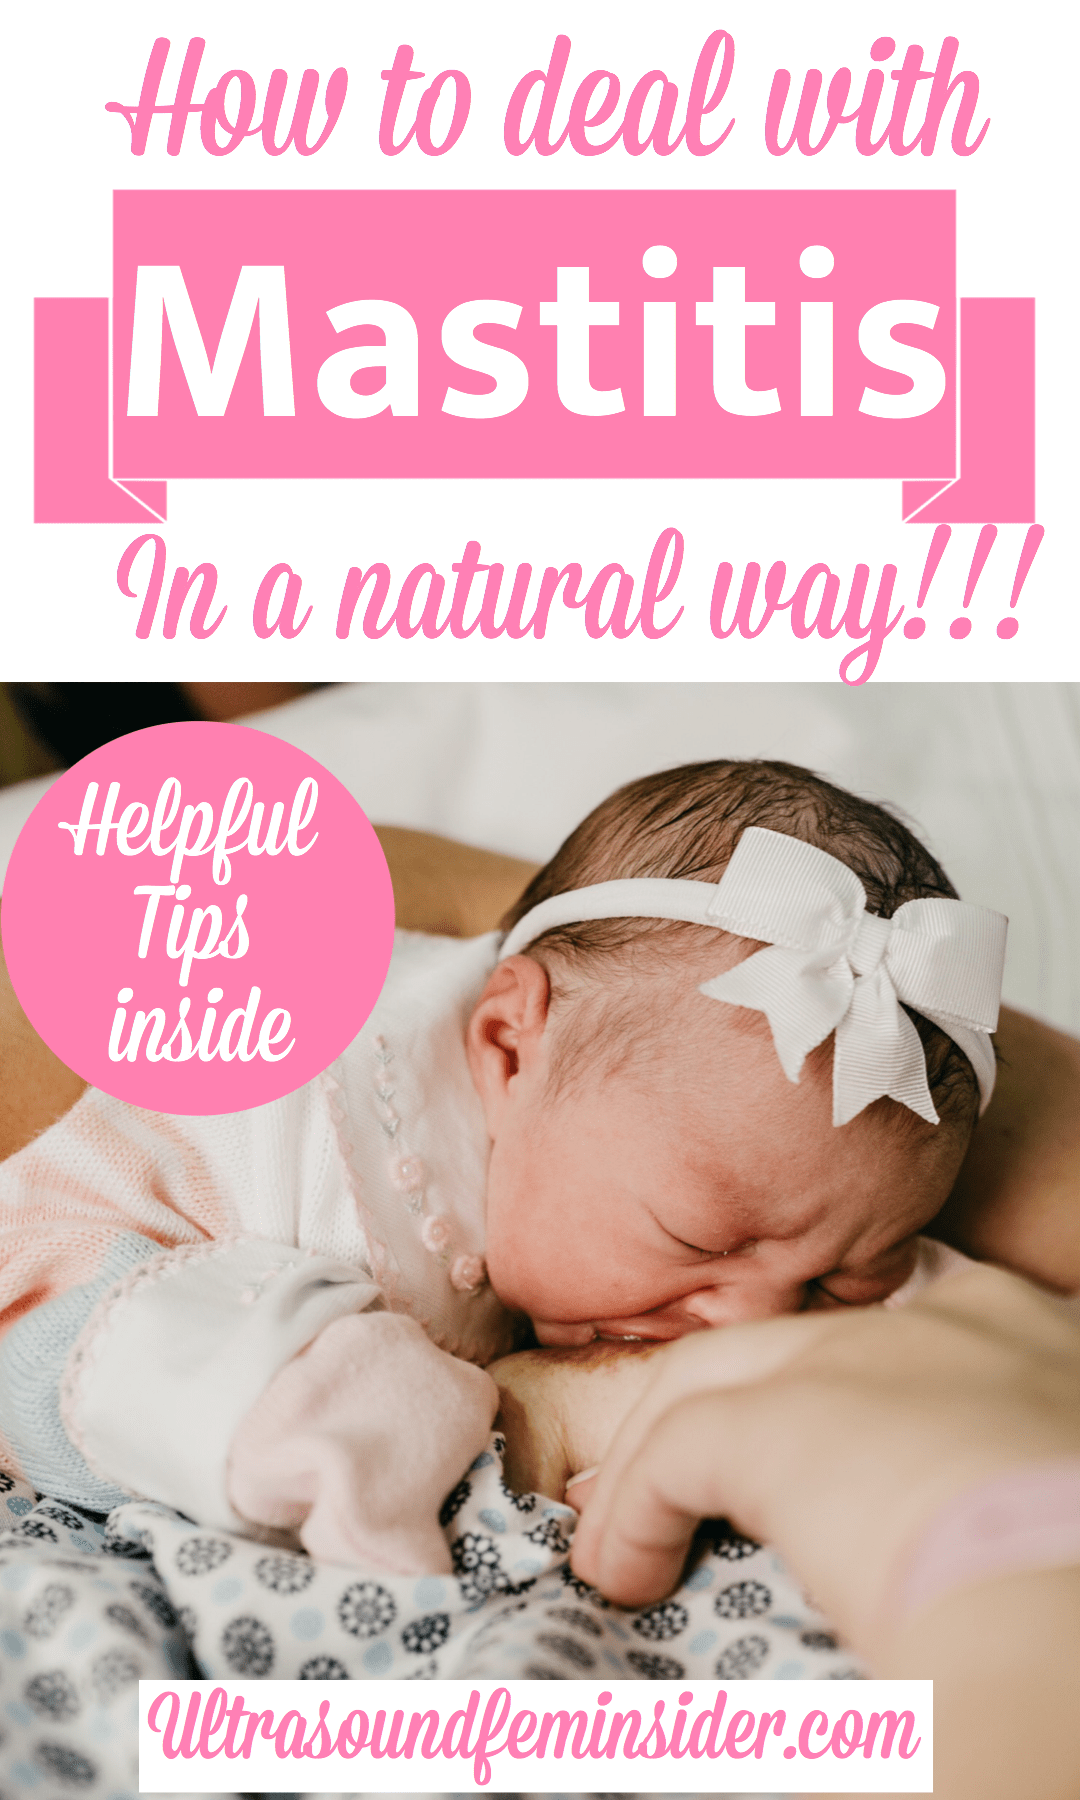 Tips to prevent and cure mastitis